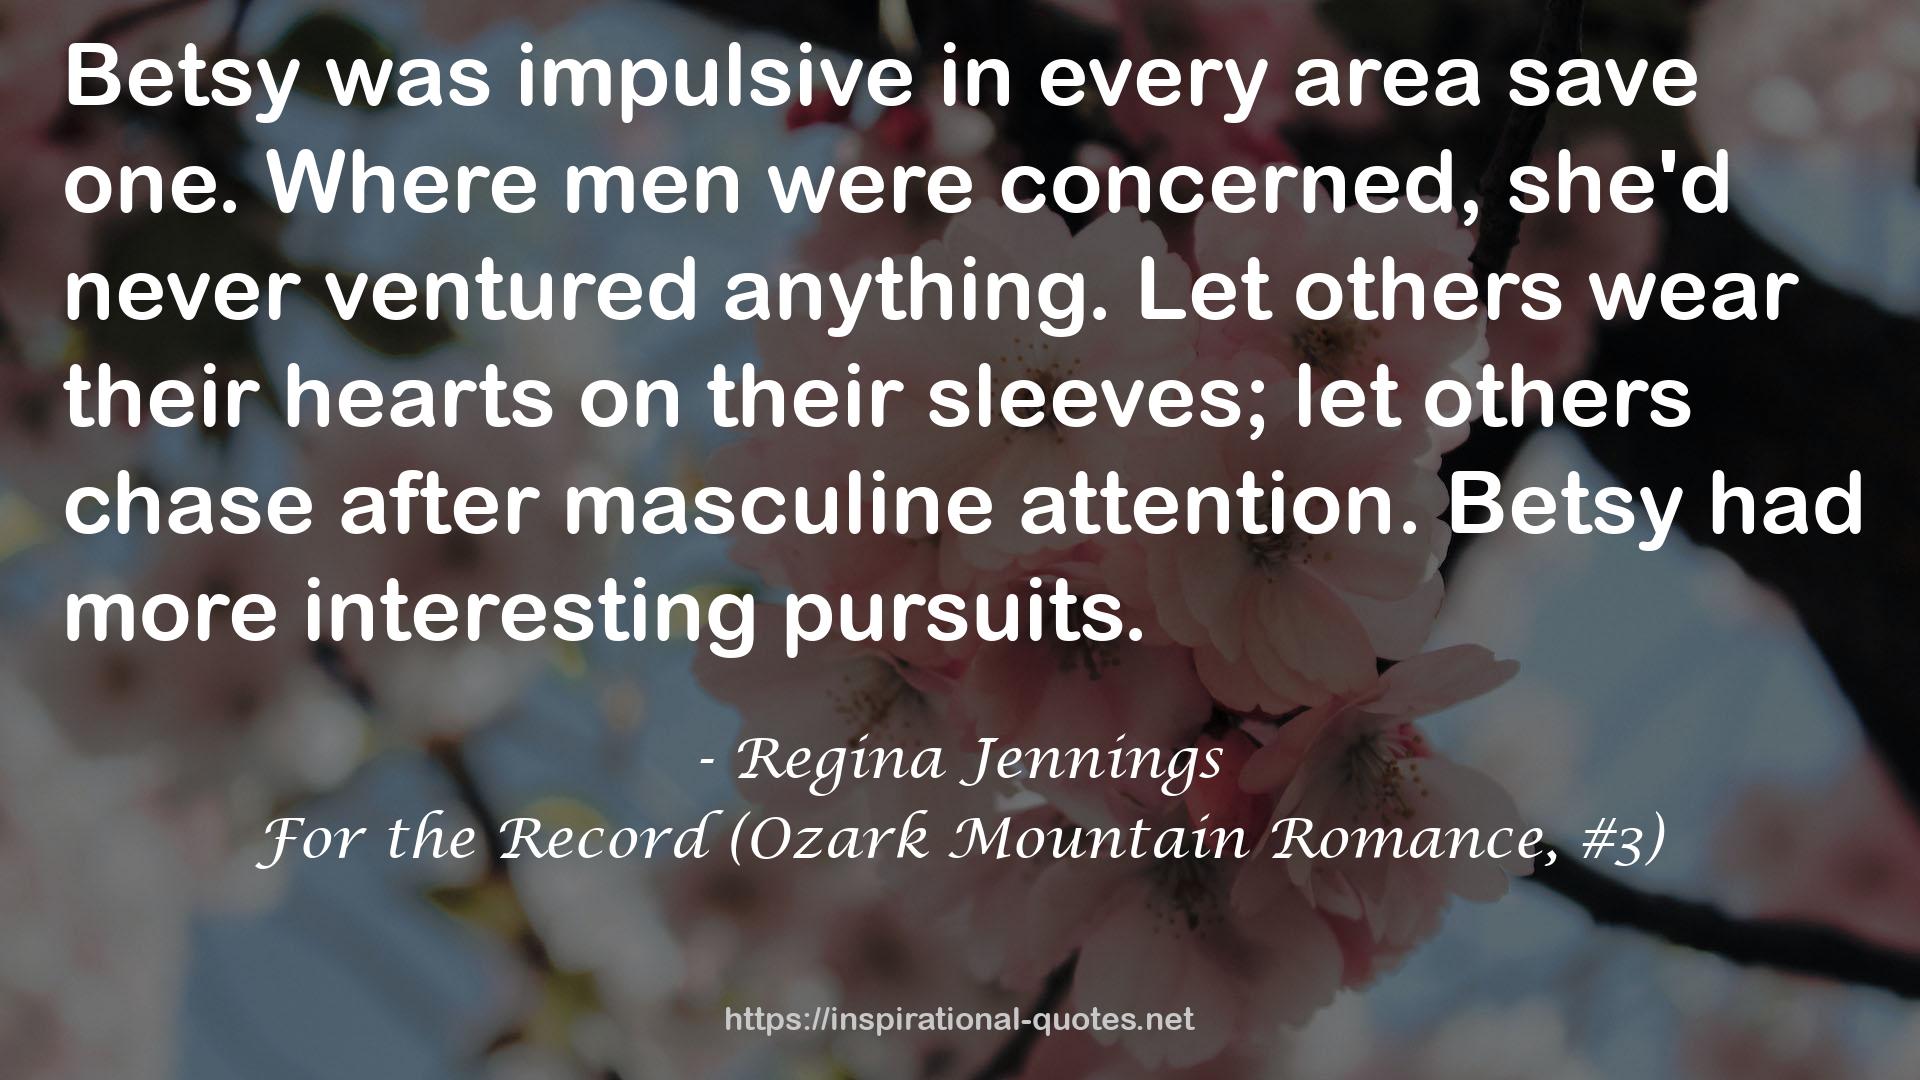 For the Record (Ozark Mountain Romance, #3) QUOTES